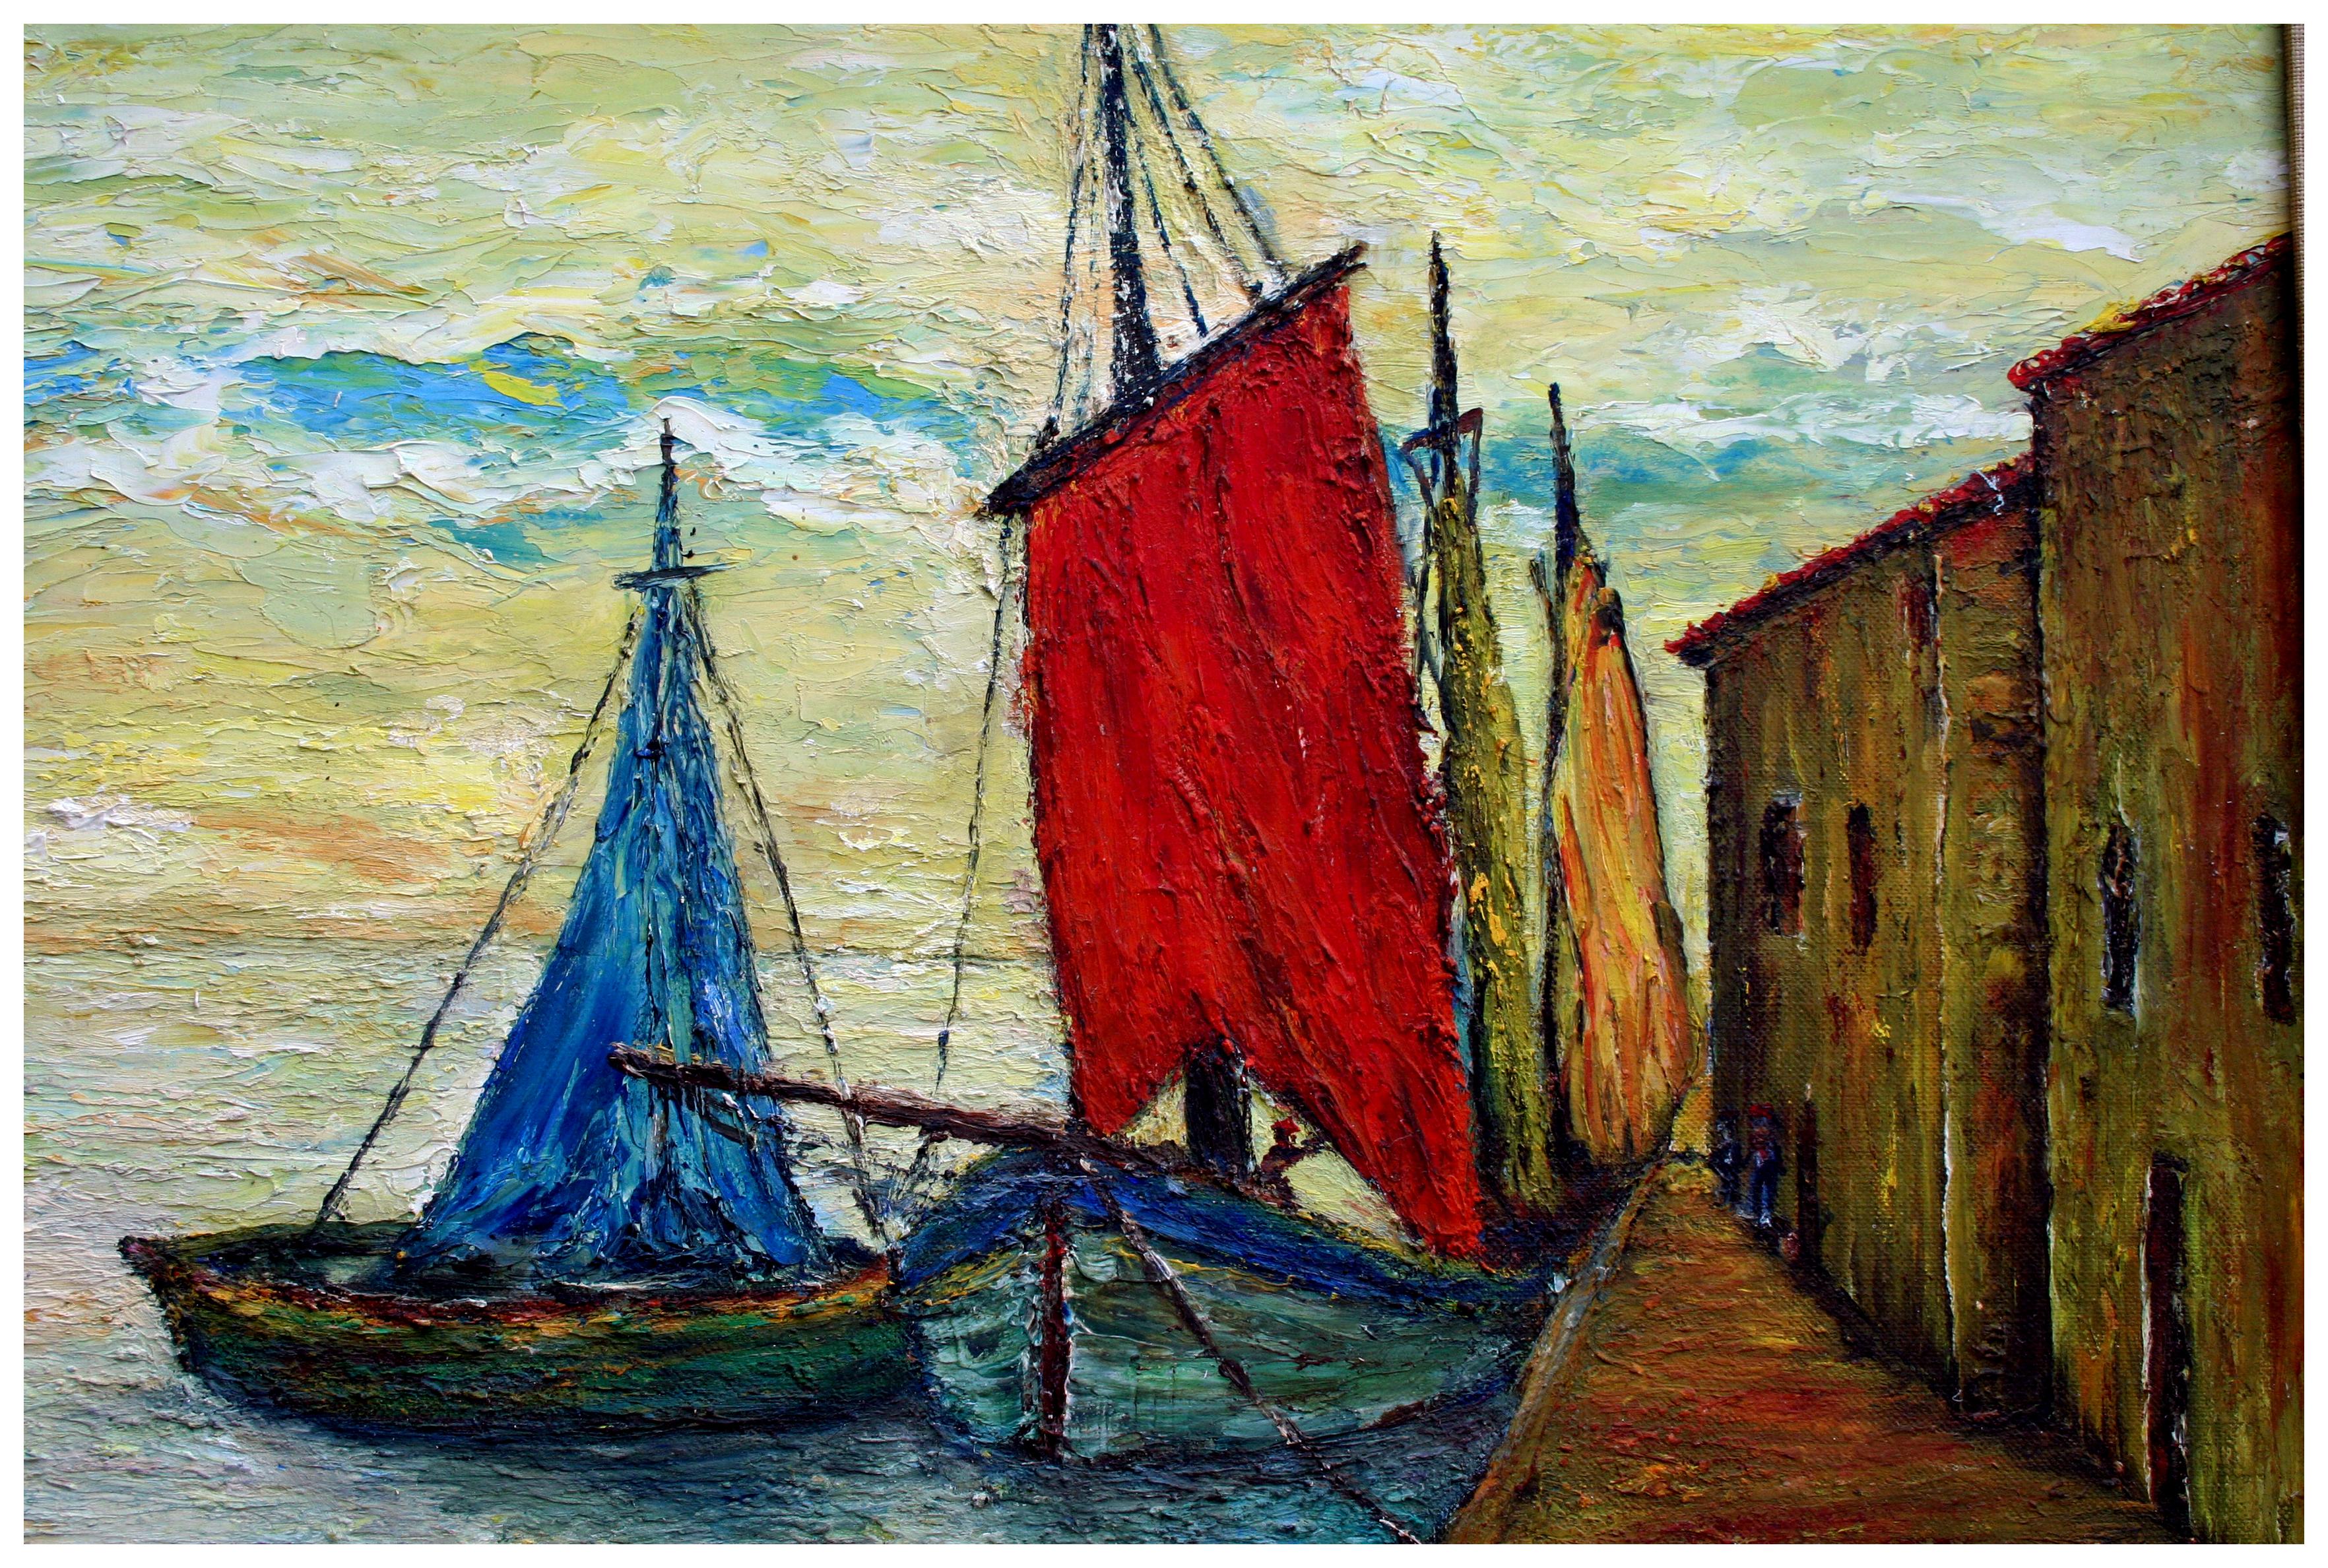 Open Sails - Painting by De Geno